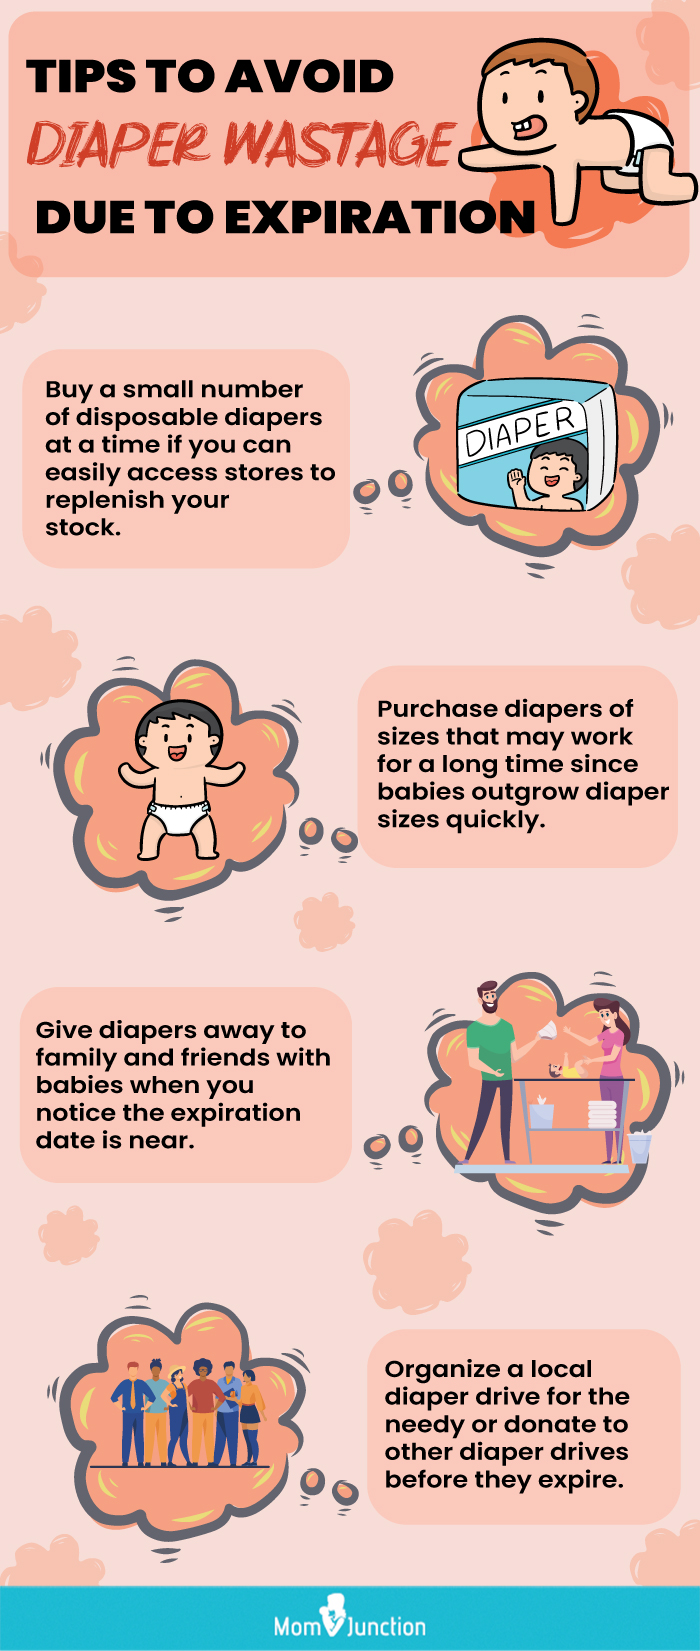 tips for avoiding disposable diaper watage due to expiration (infographic)